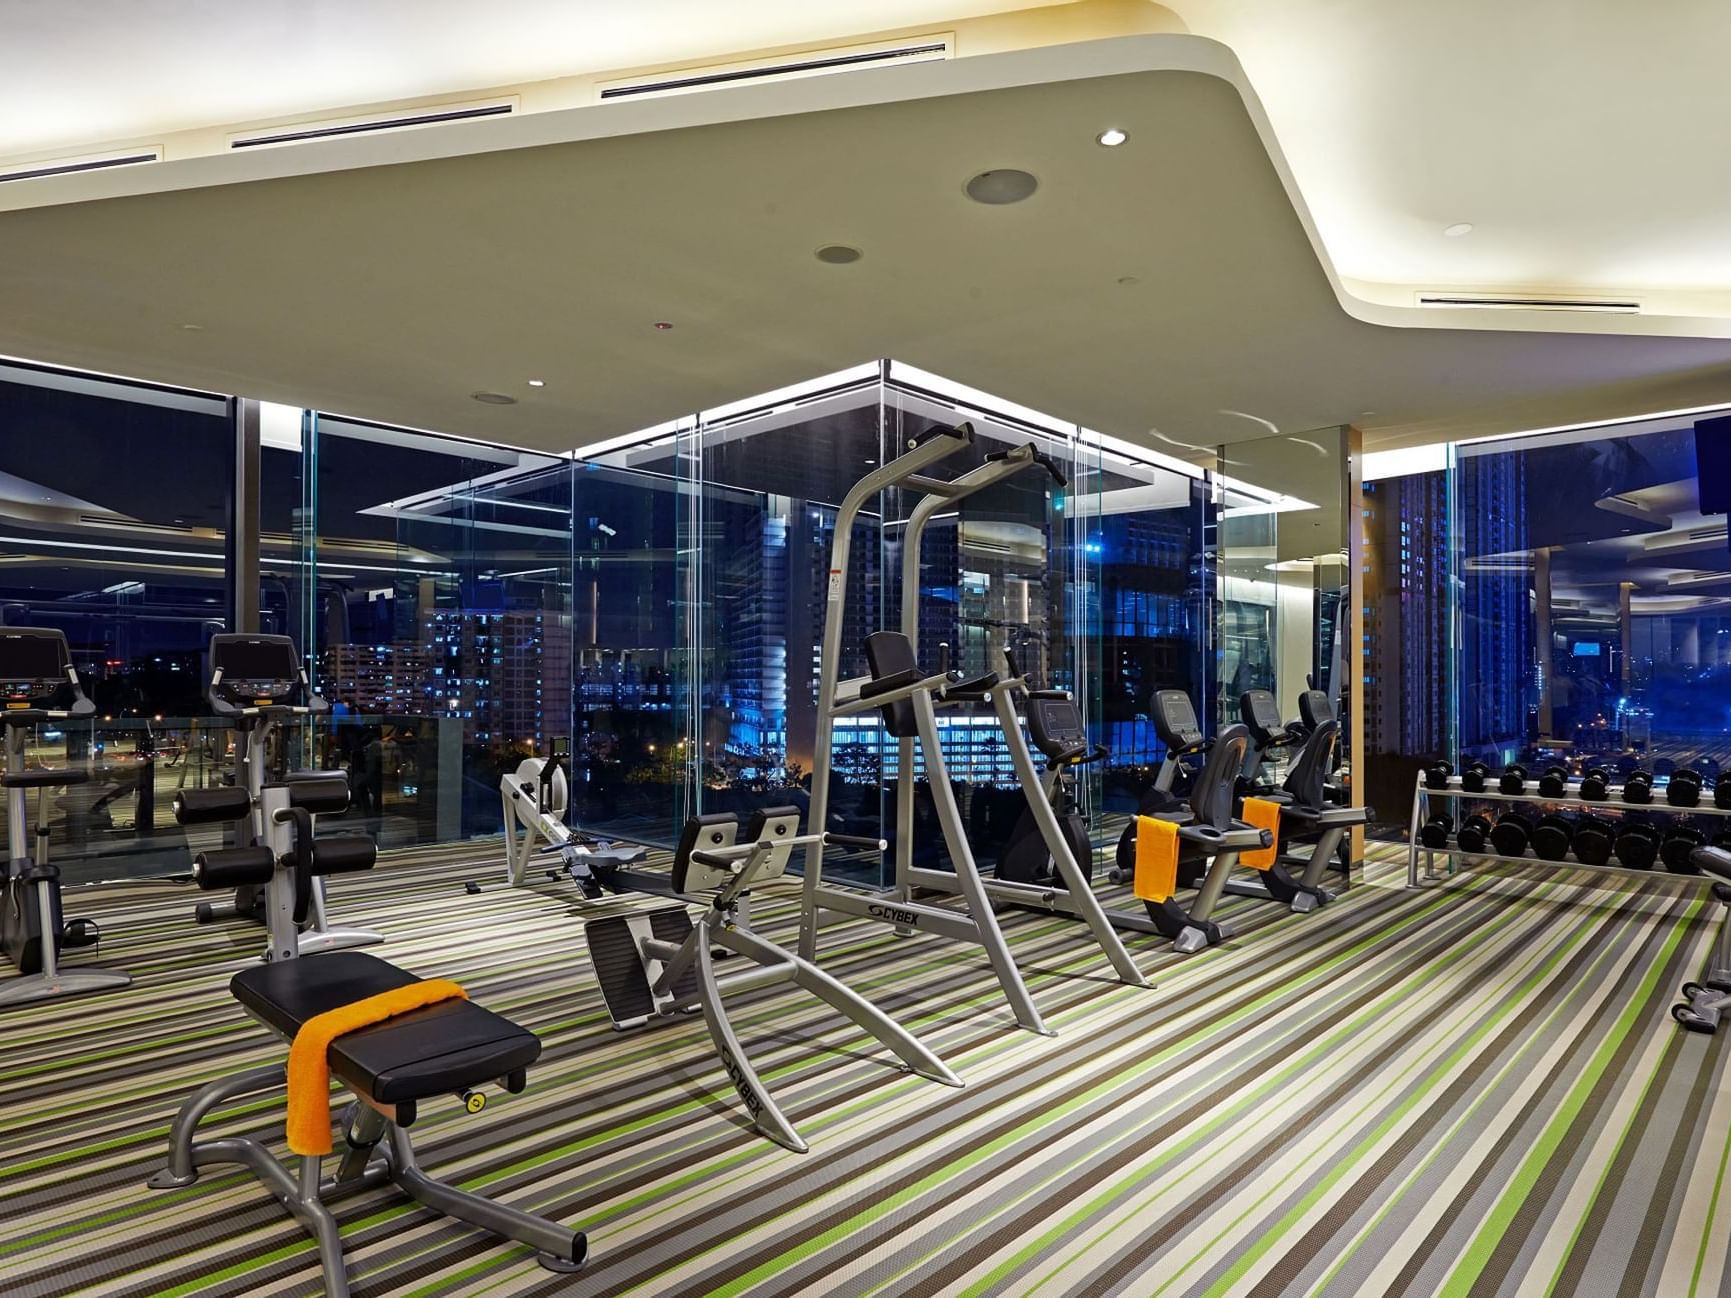 The fully-equipped fitness center at VE Hotel & Residence